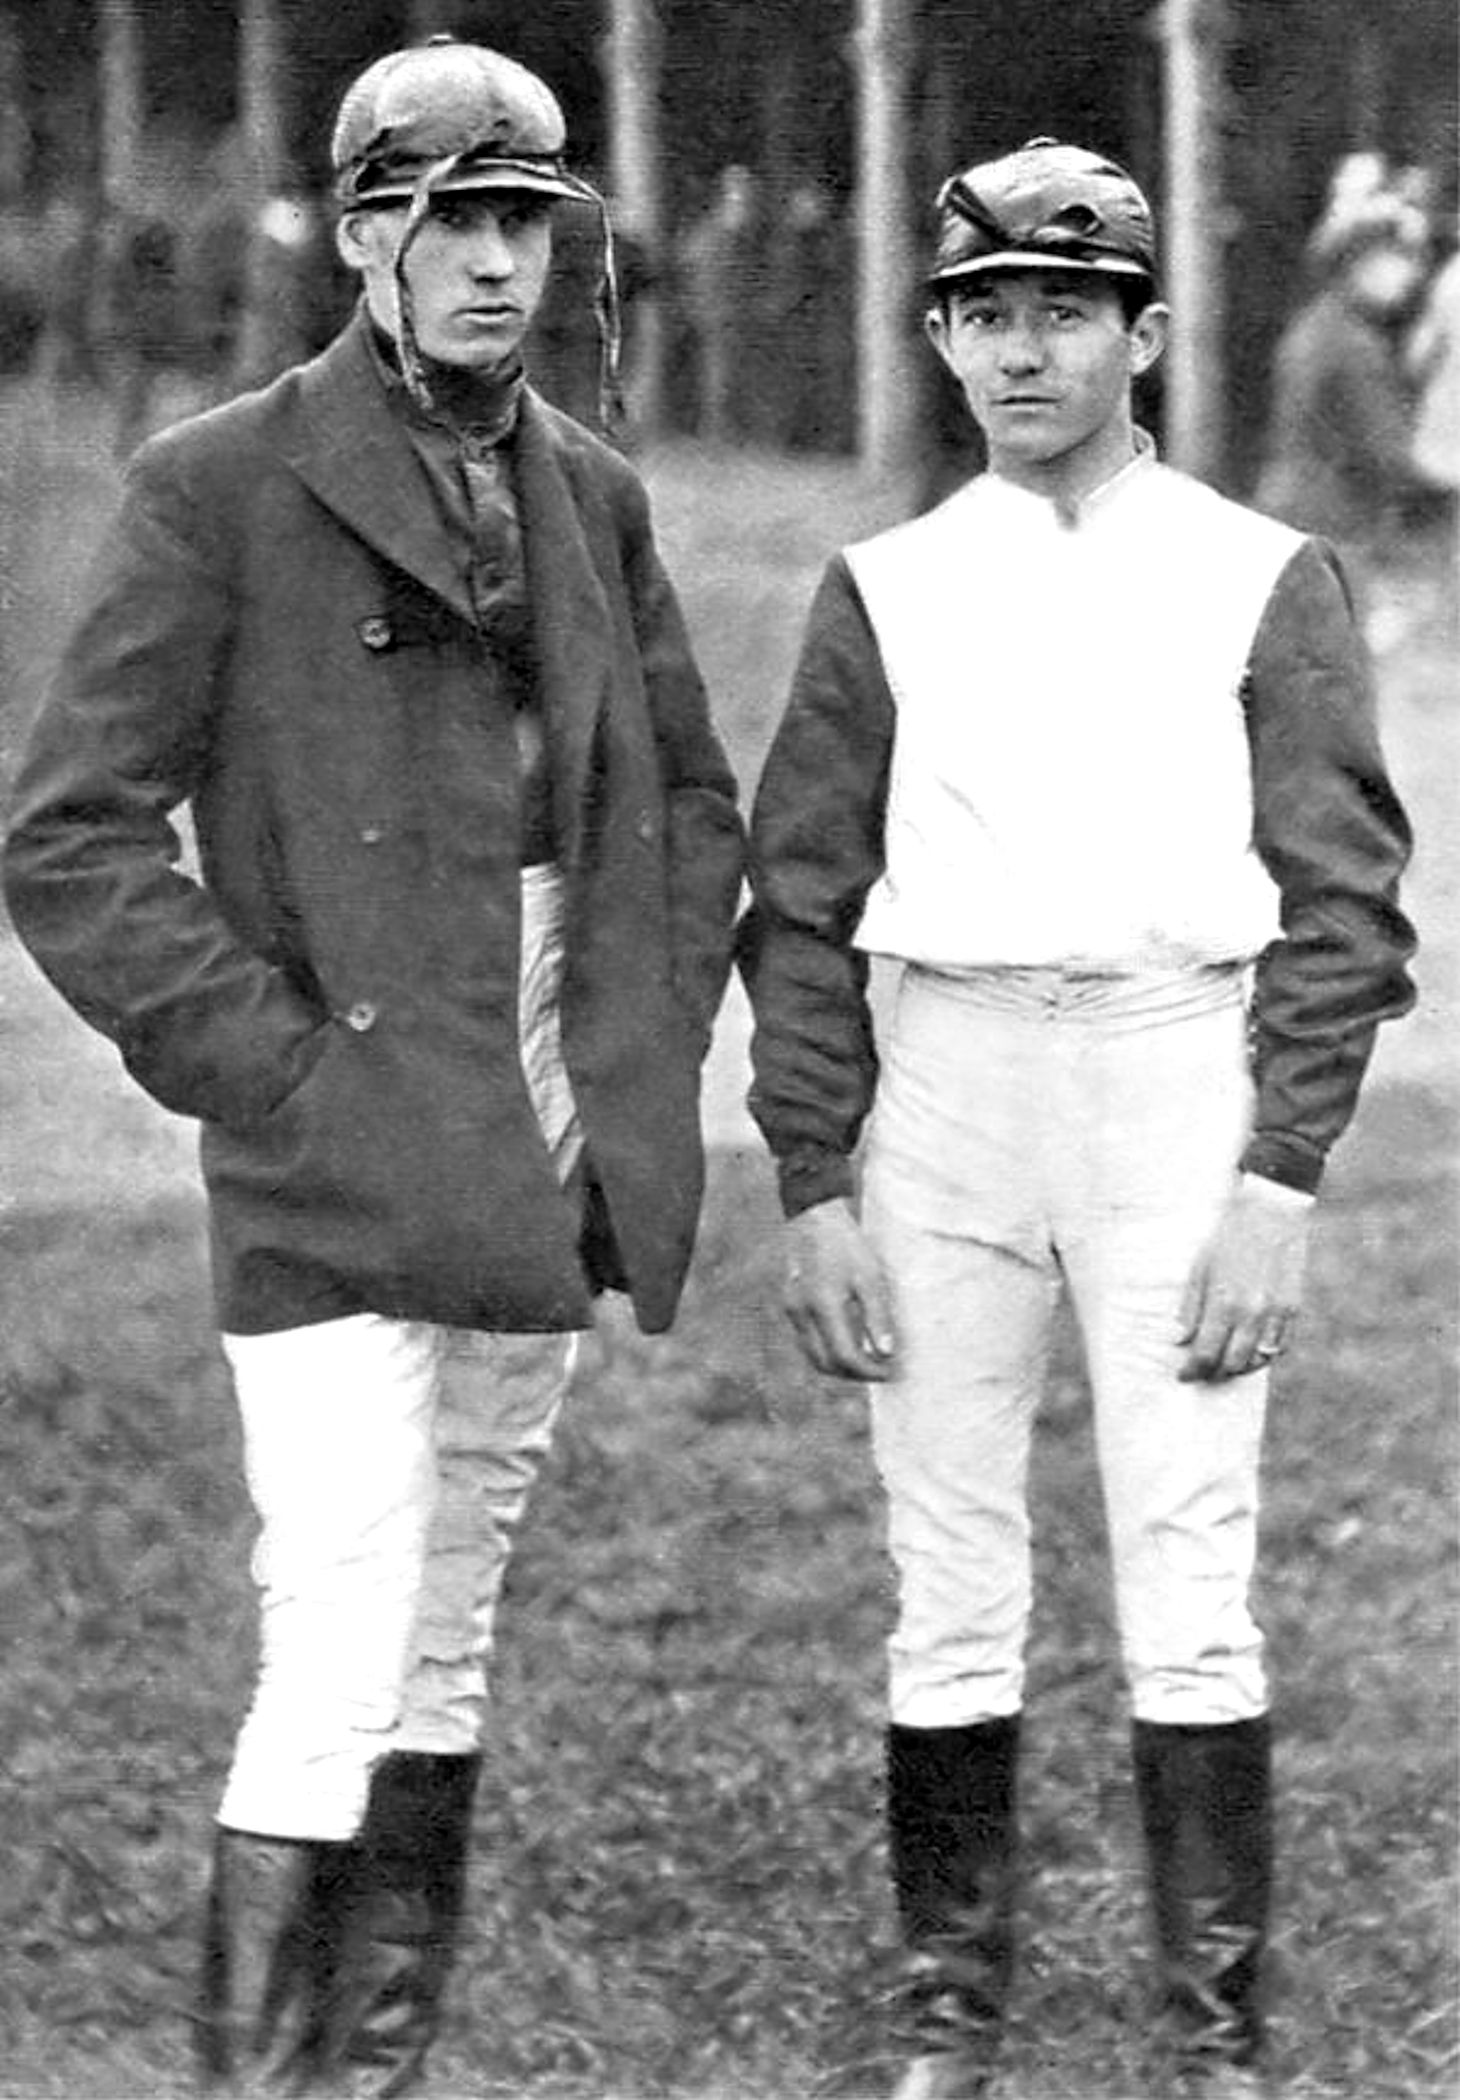 Henry "Skeets" Martin, left and Tod Sloan in 1899 at Morris Park Racetrack (from Munsey's Magazine) (Public Domain)